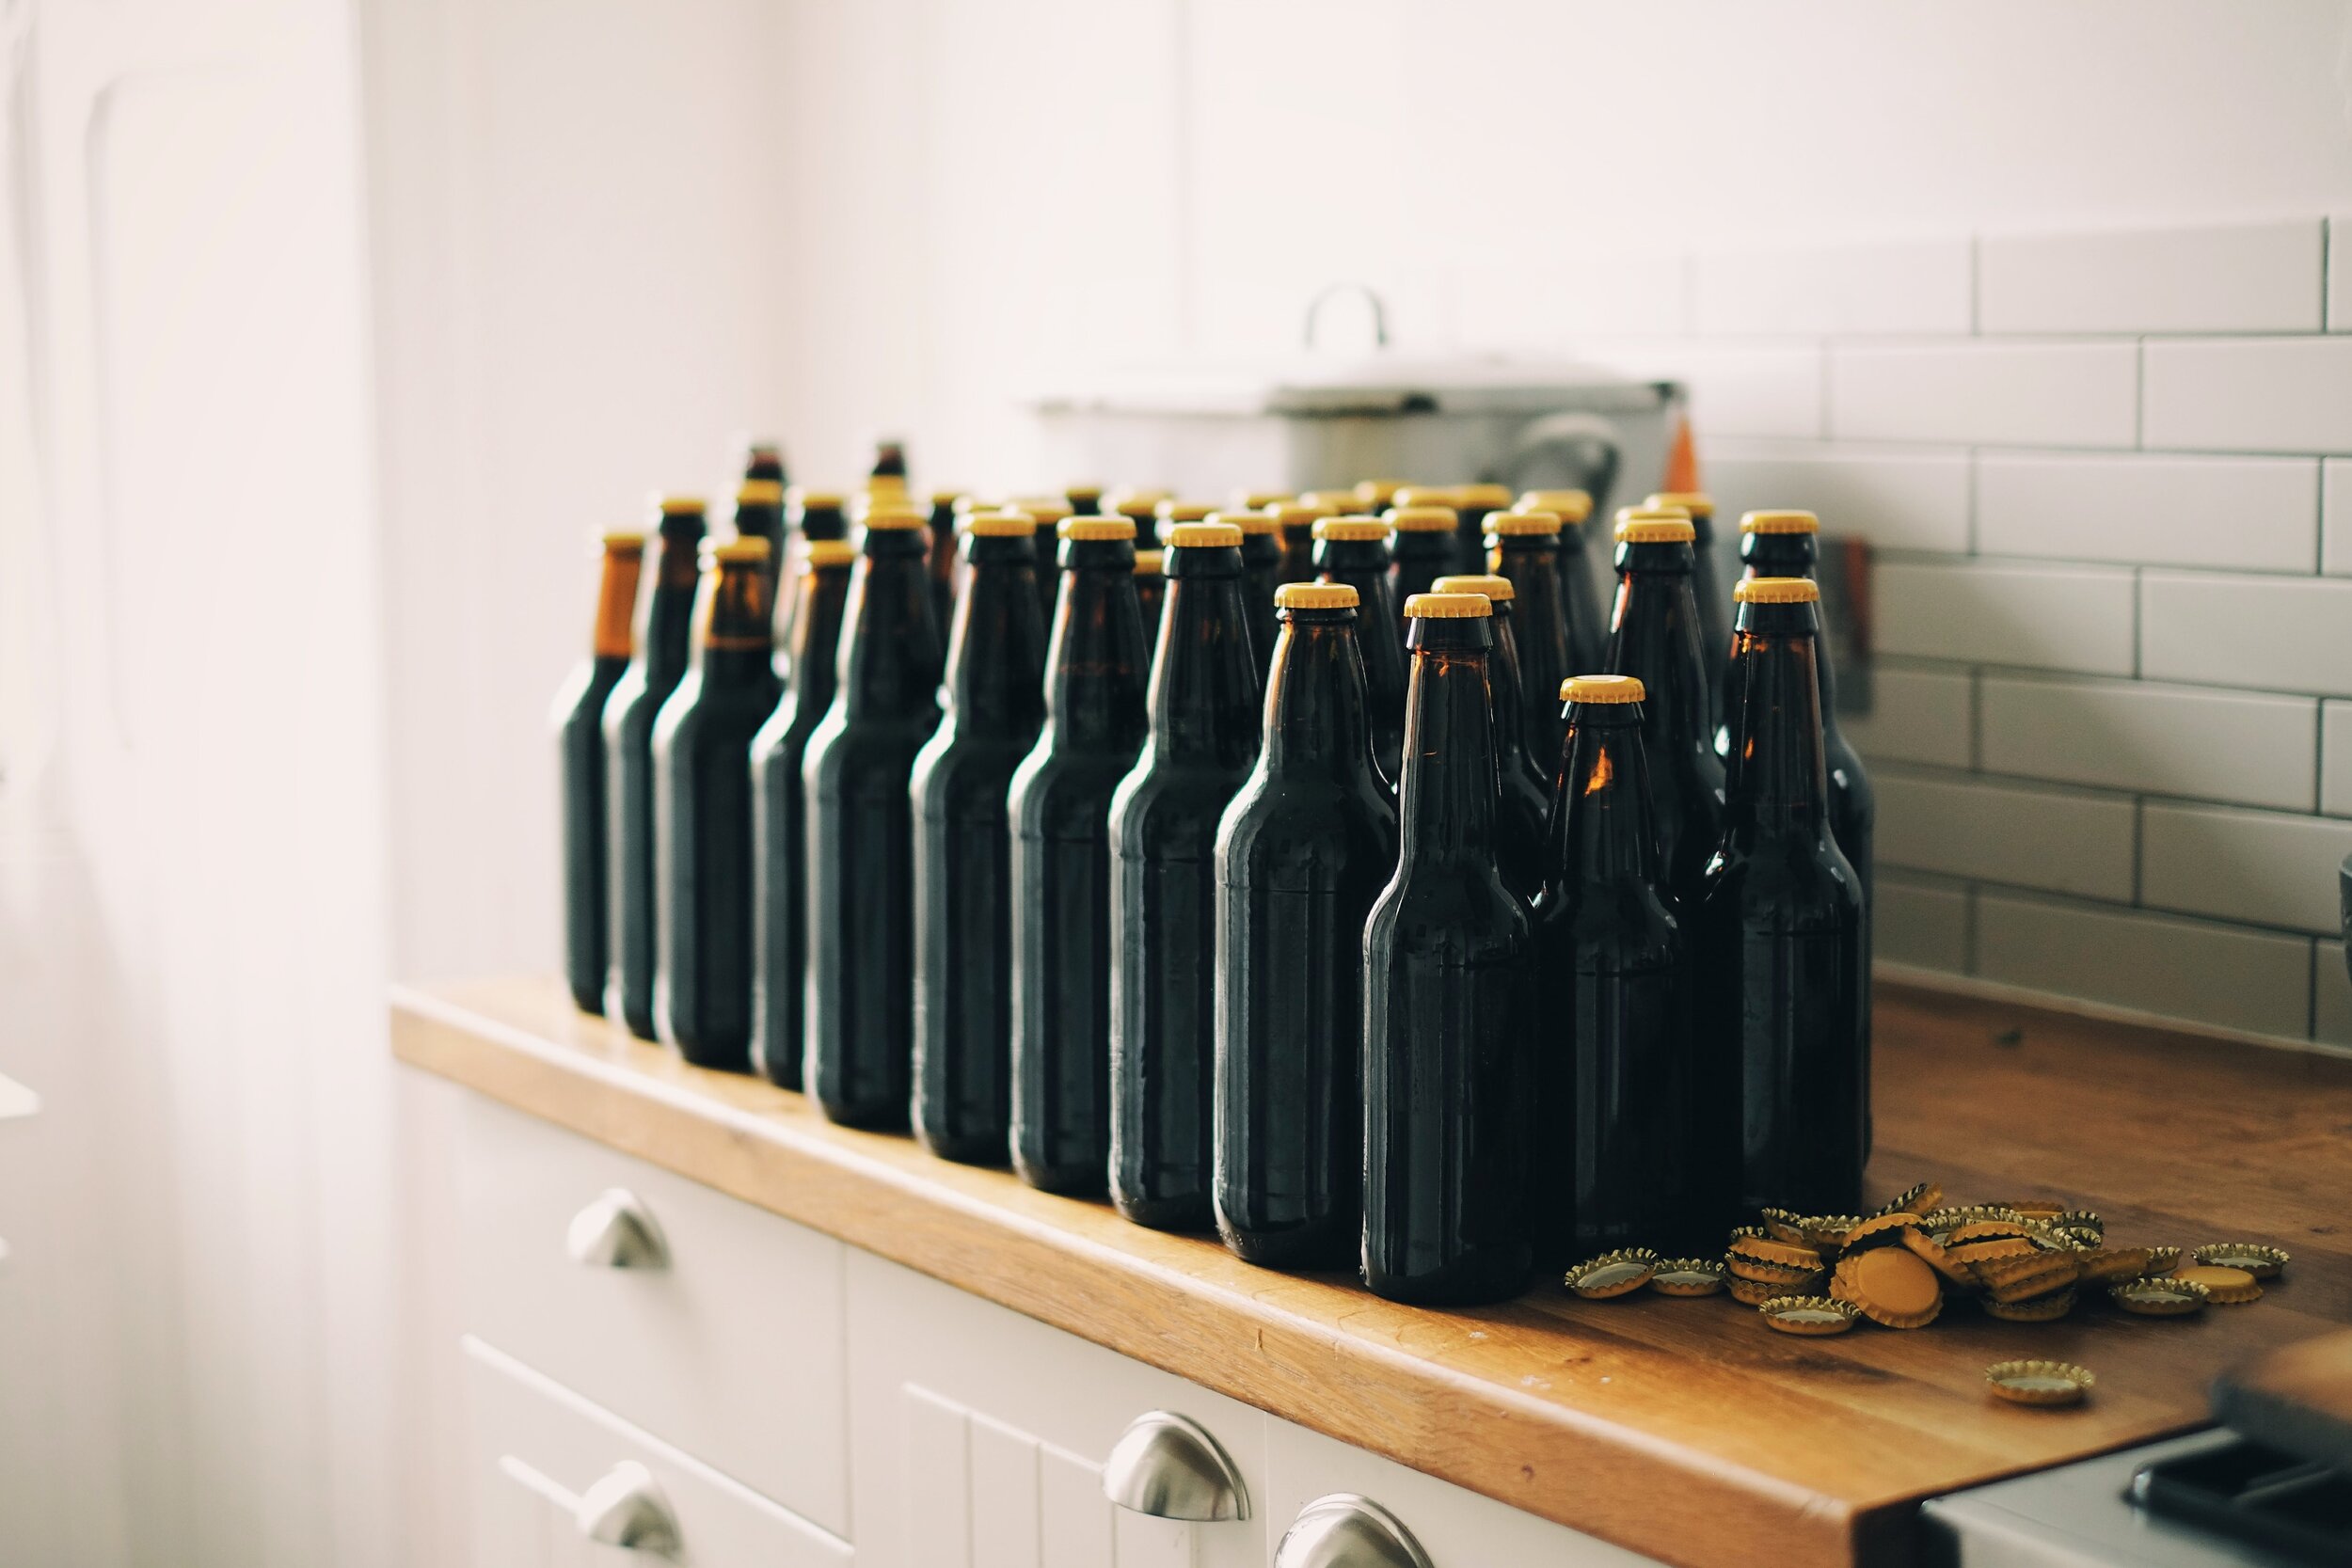 Bottled home brew beer made at Loophole City, the commune built by 10K Dollar Day